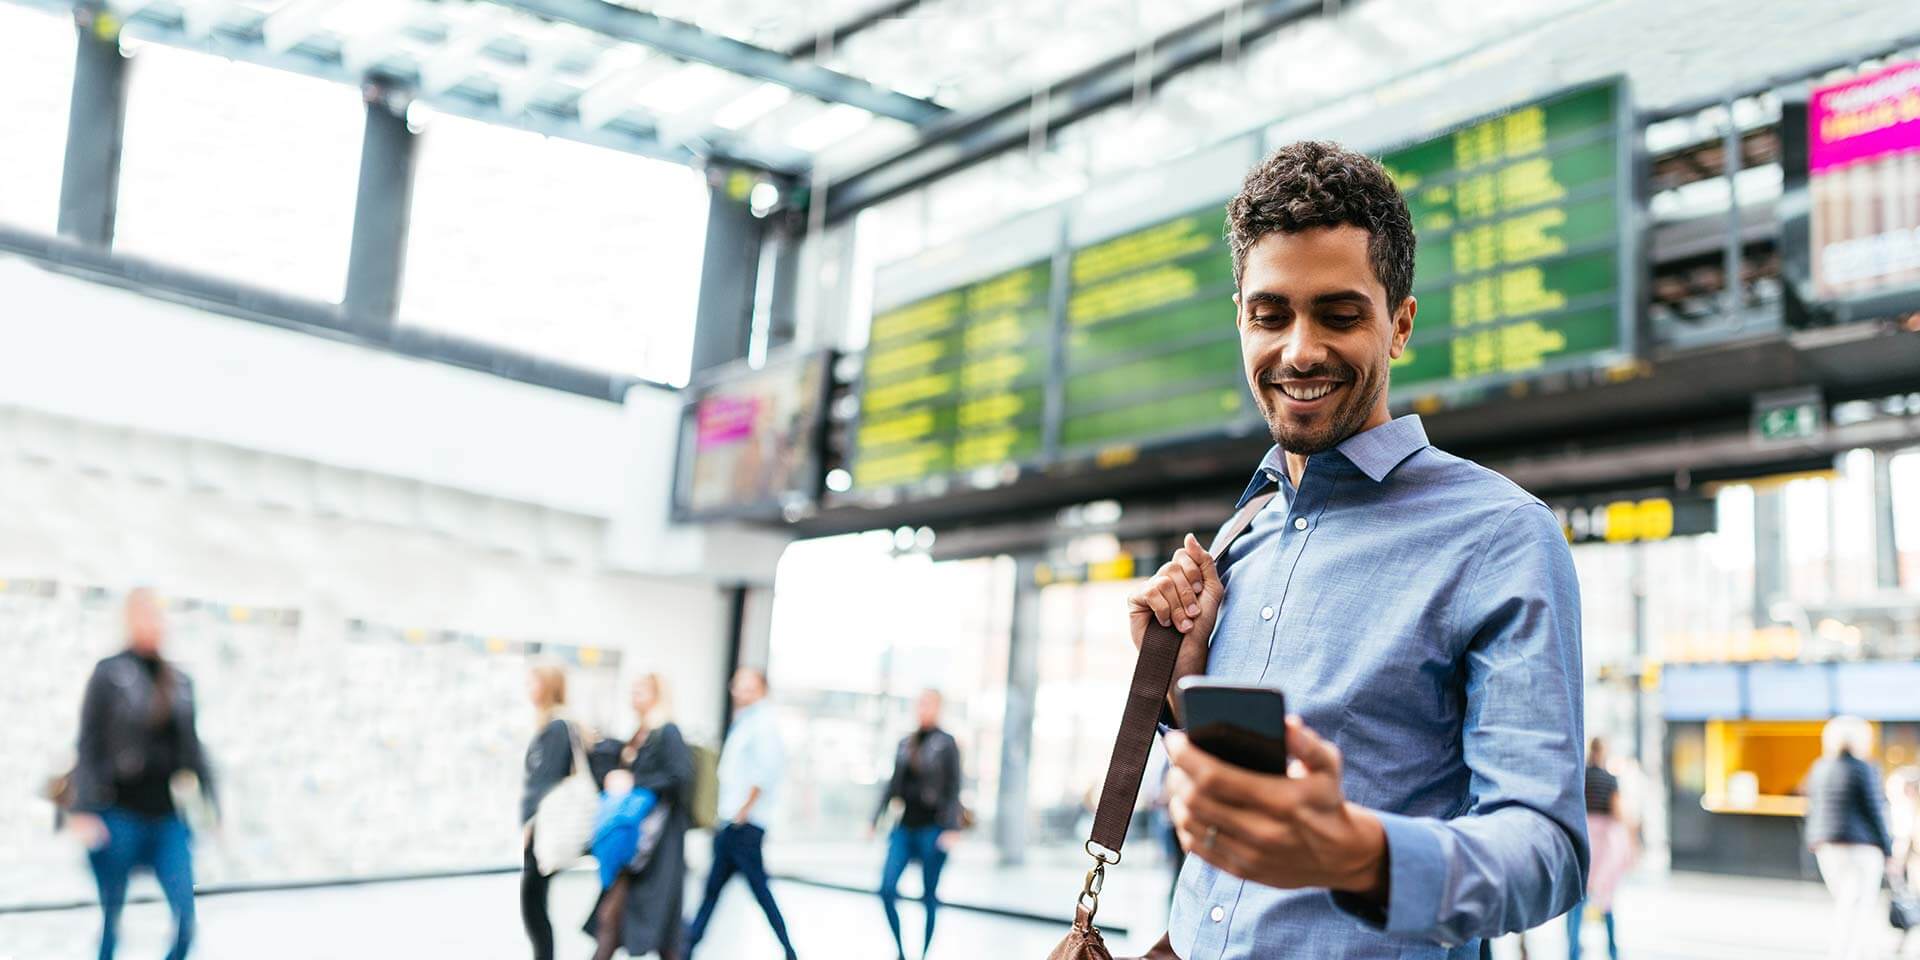 A businessman in an airport is smiling and using his phone to make a mobile deposit with the mobile banking app